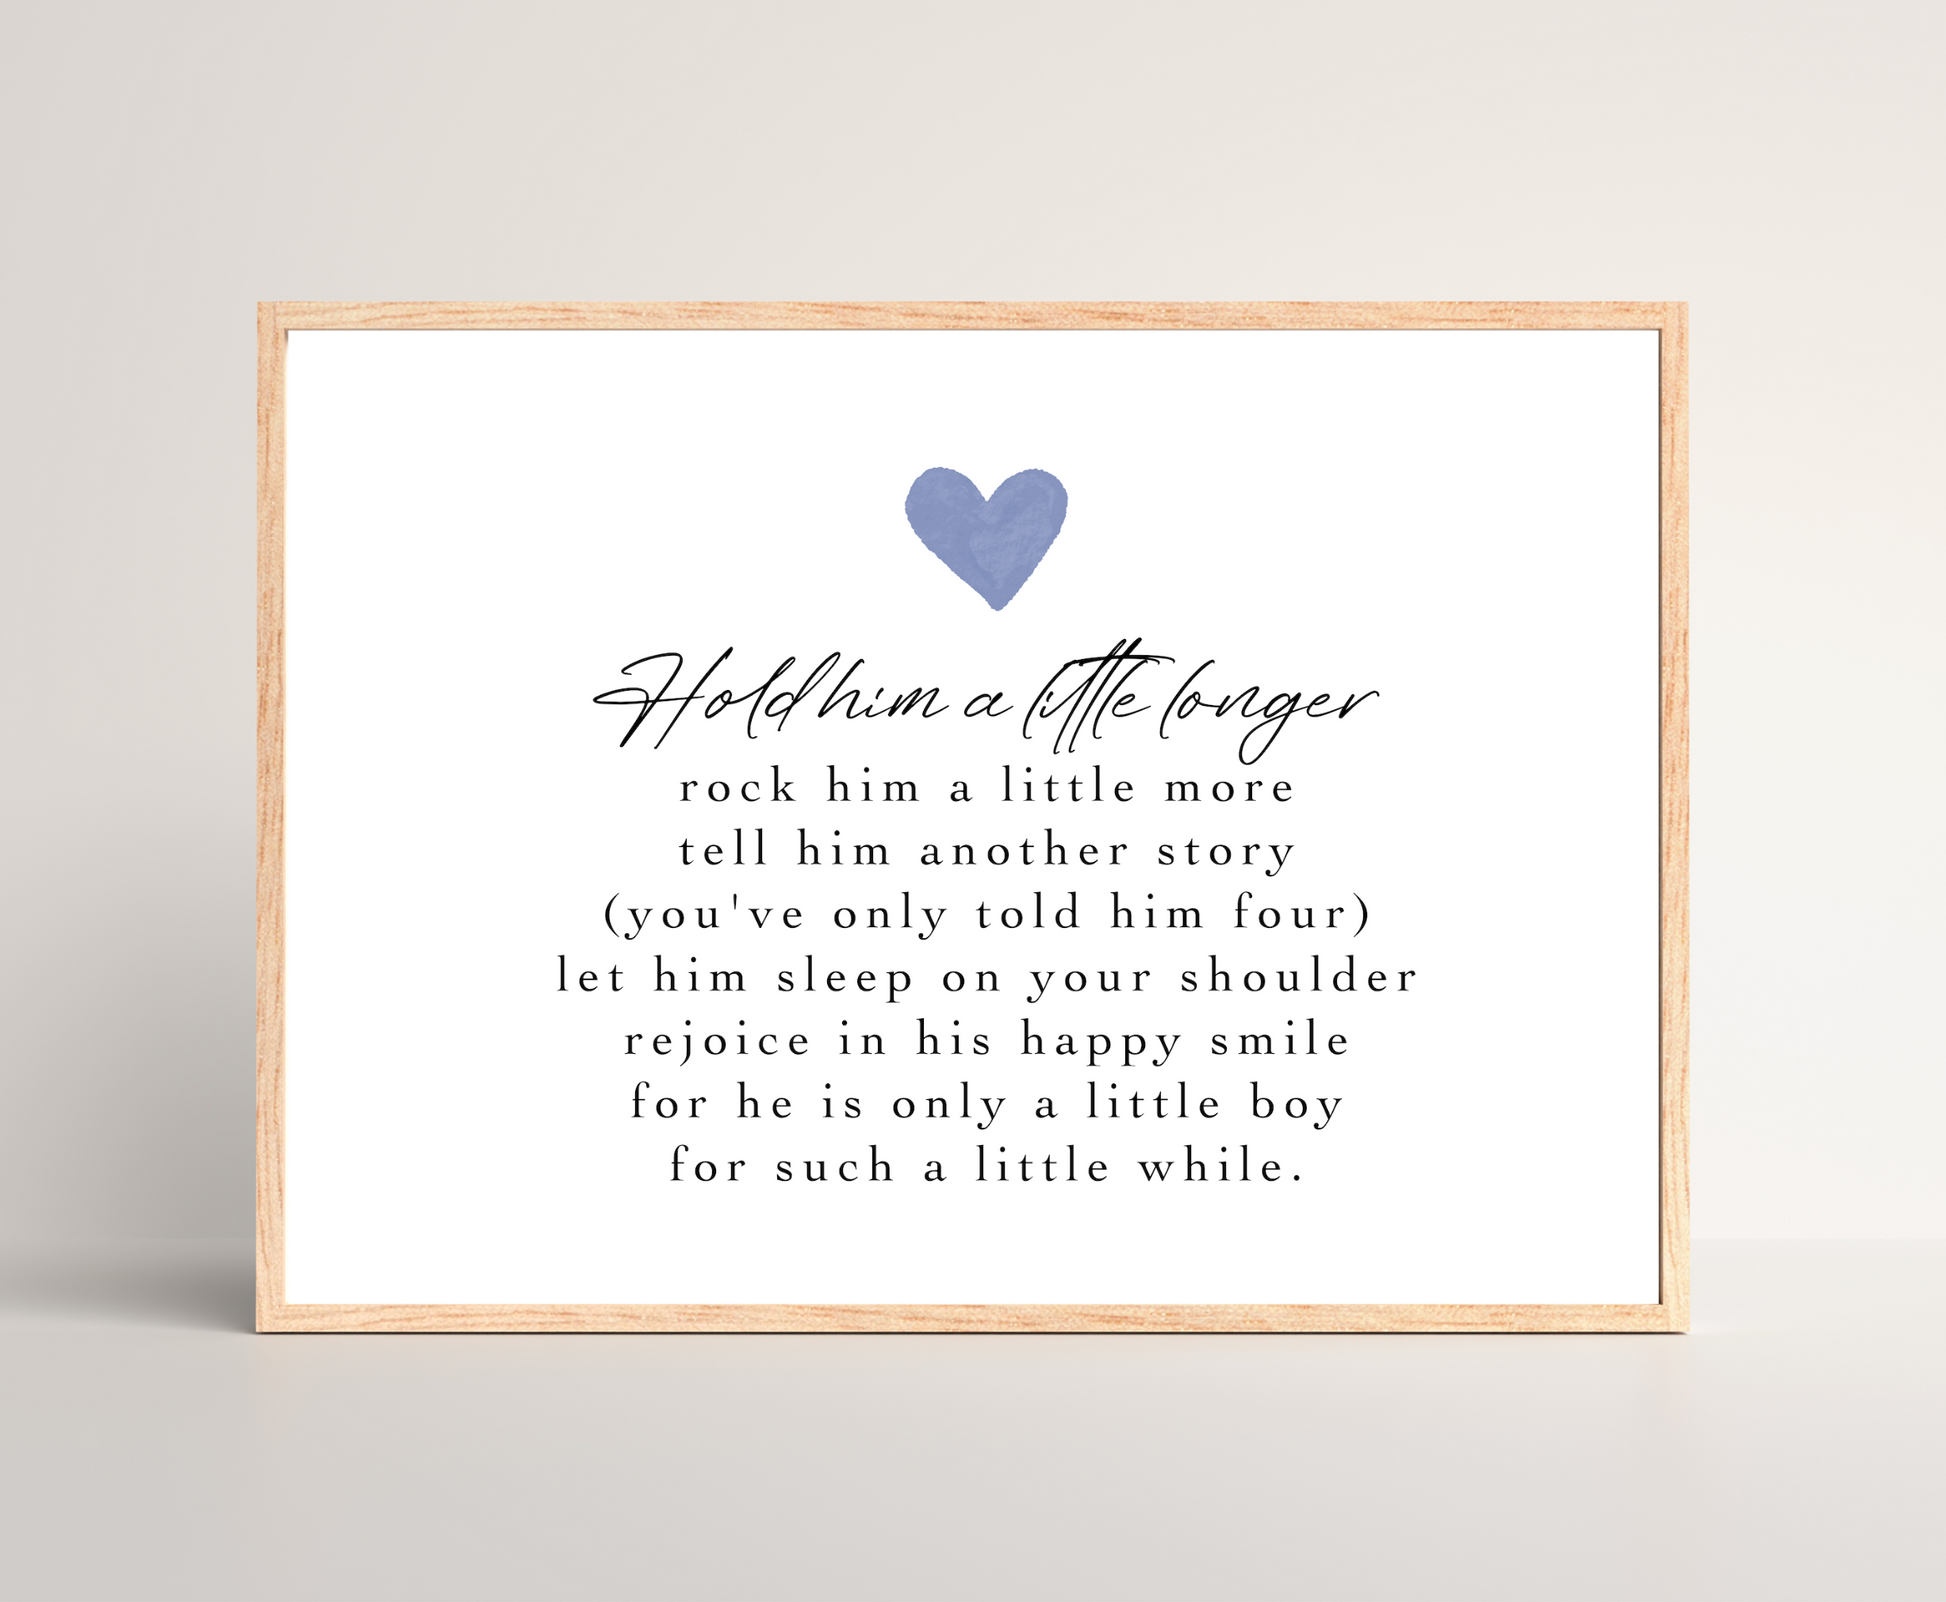 A digital poster that has a blue heart at the top, and a piece of writing that says: Hold him a little longer, rock him a little more, tell him another story, (you have only told him four), let him sleep on your shoulder, rejoice in his happy smile, for he is only a little boy, for such a little while.